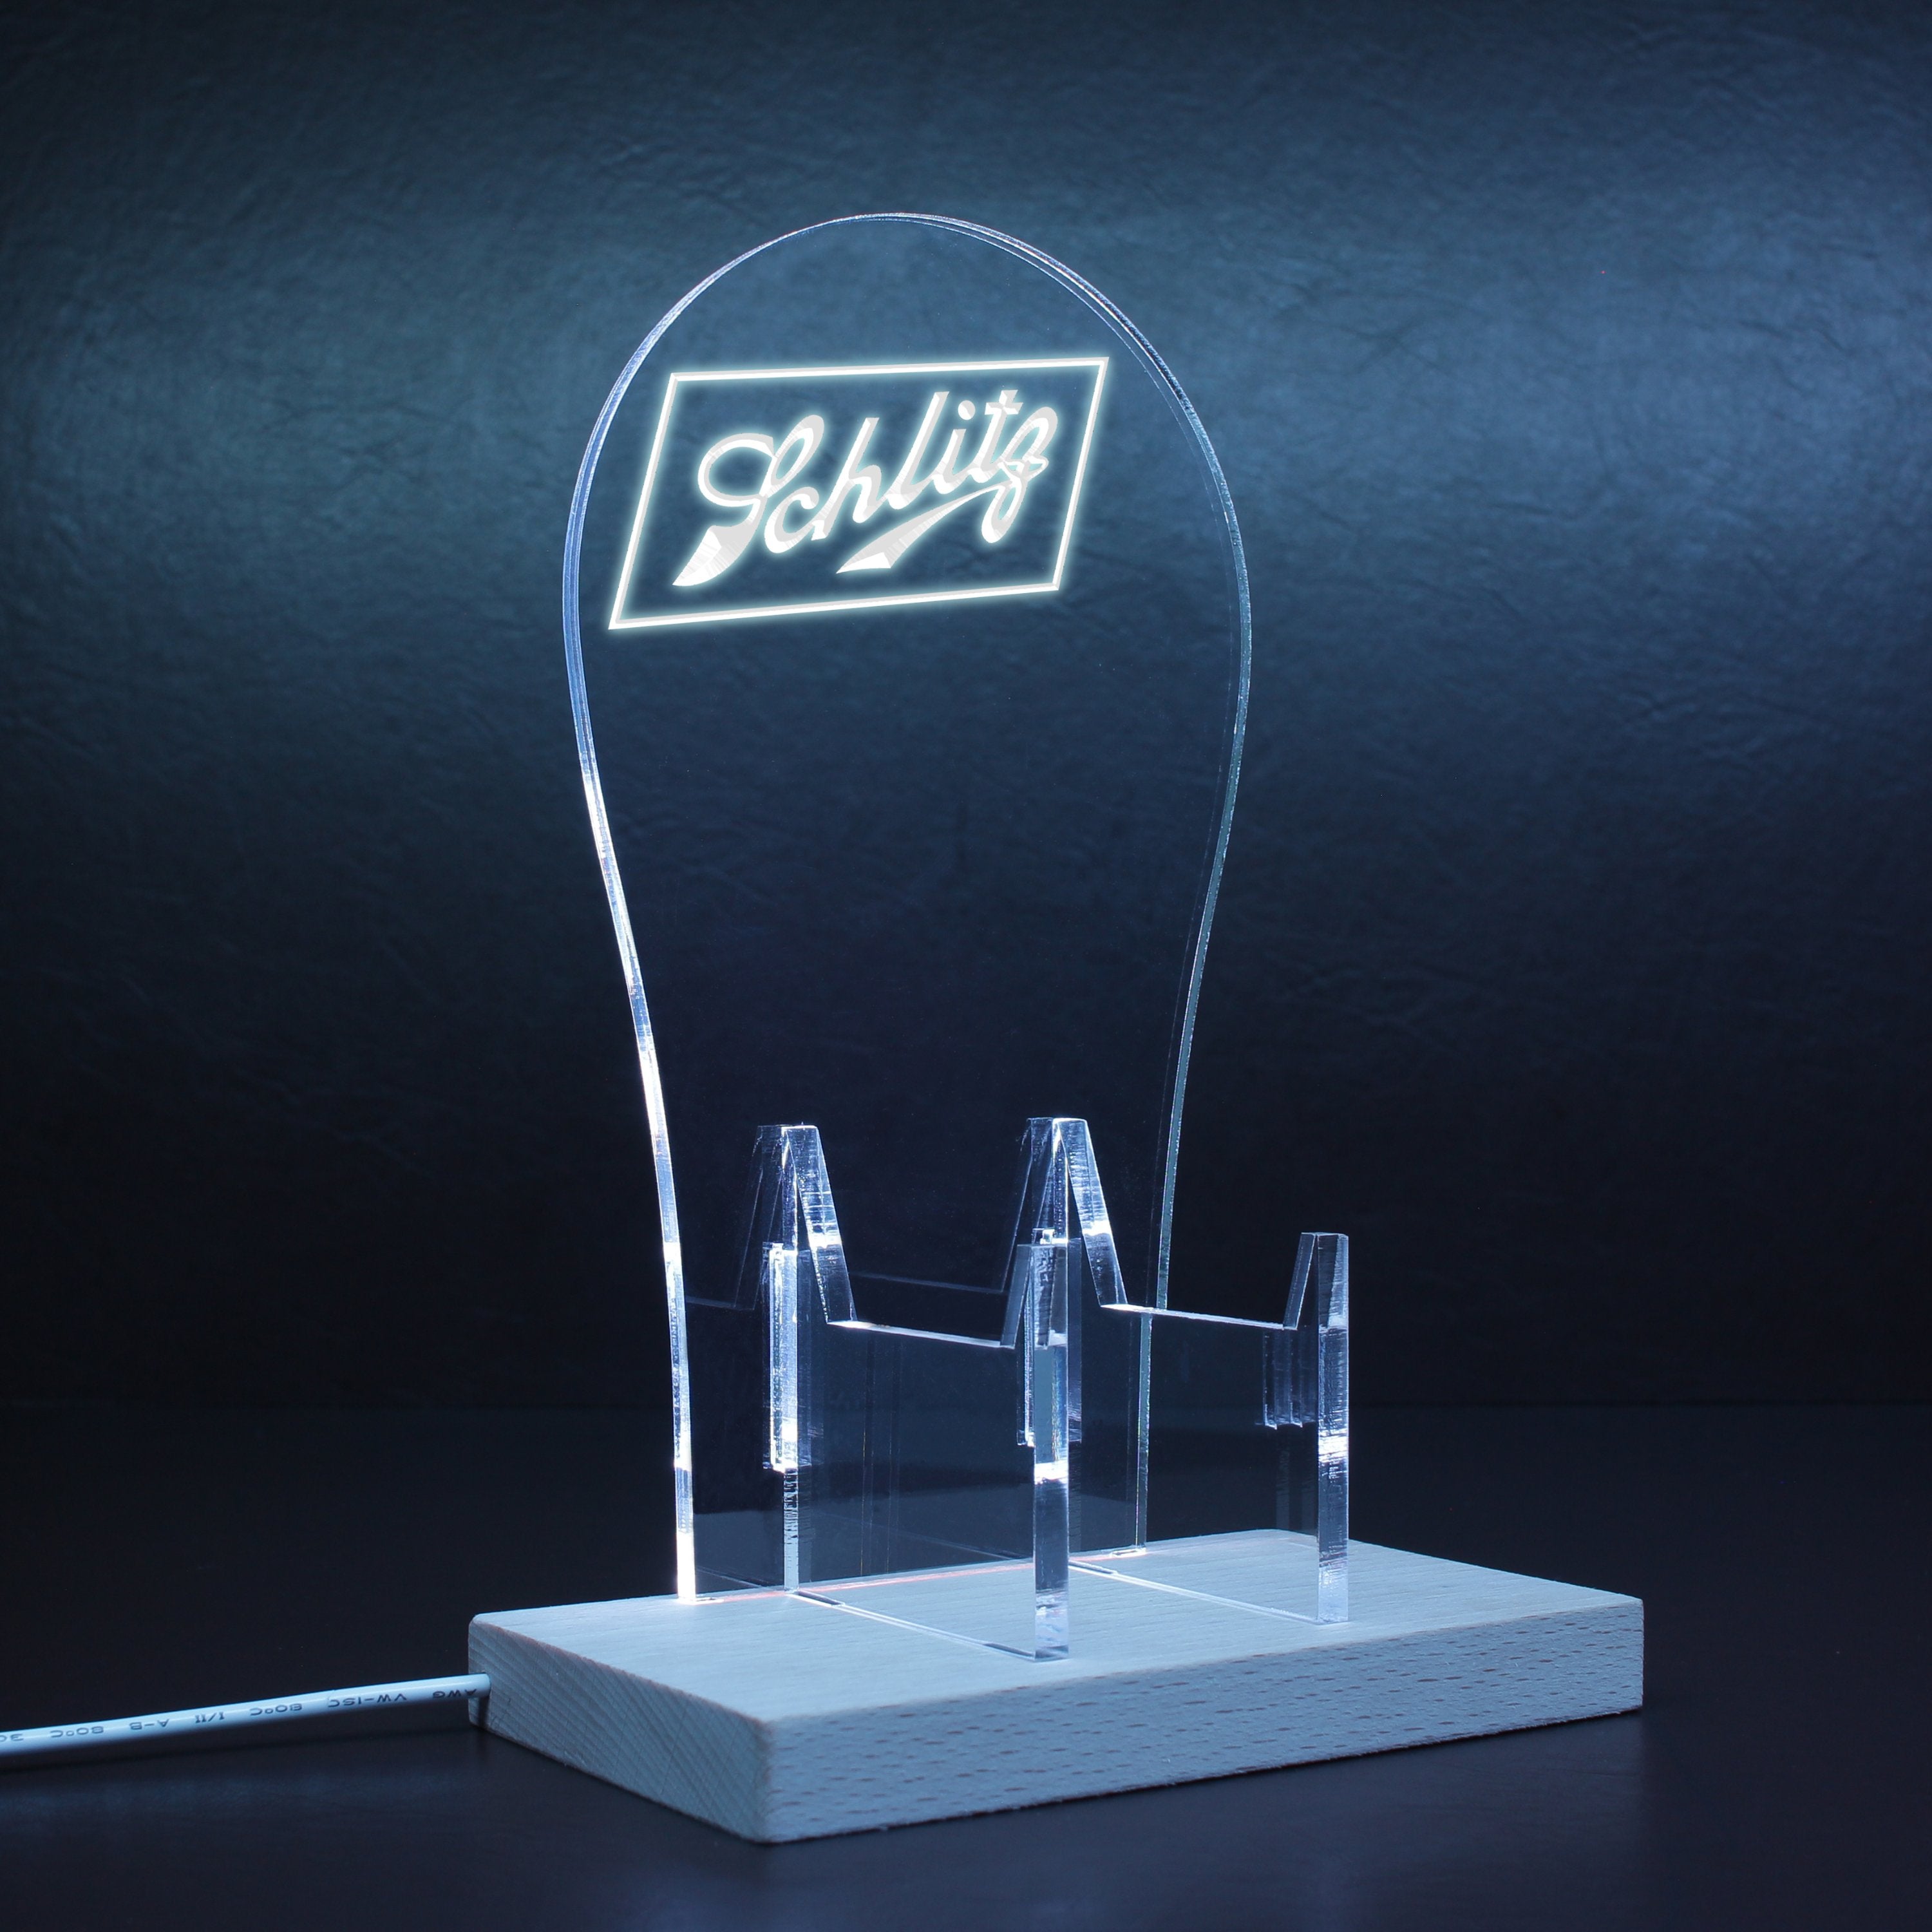 Schlitz Beer RGB LED Gaming Headset Controller Stand